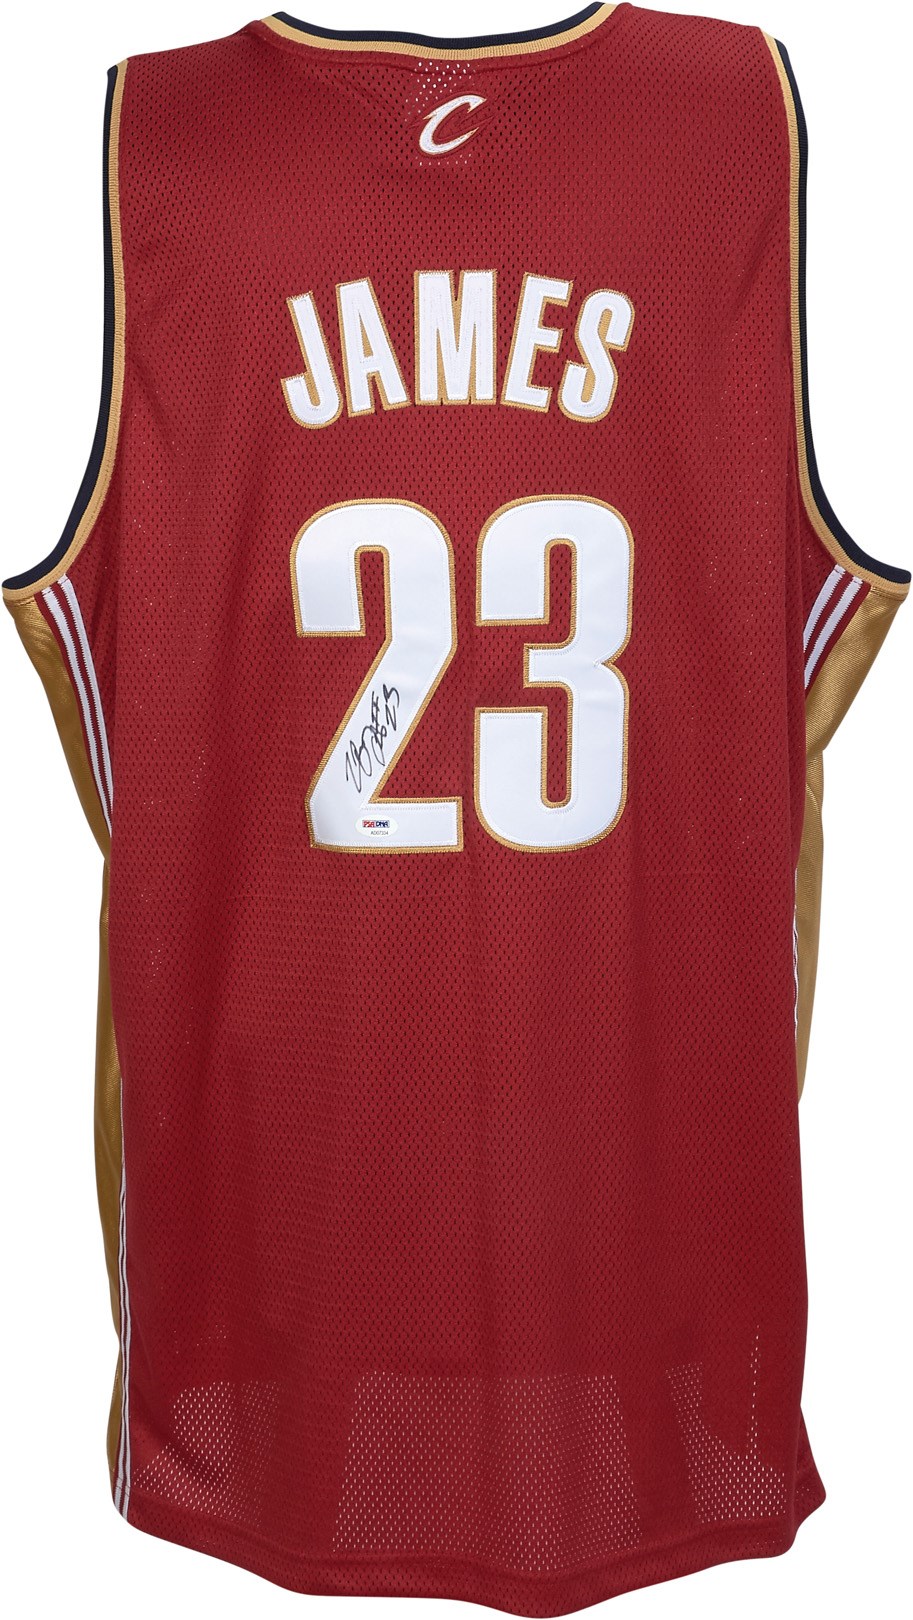 - Rookie Year LeBron James Signed Cleveland Cavaliers Jersey (PSA)